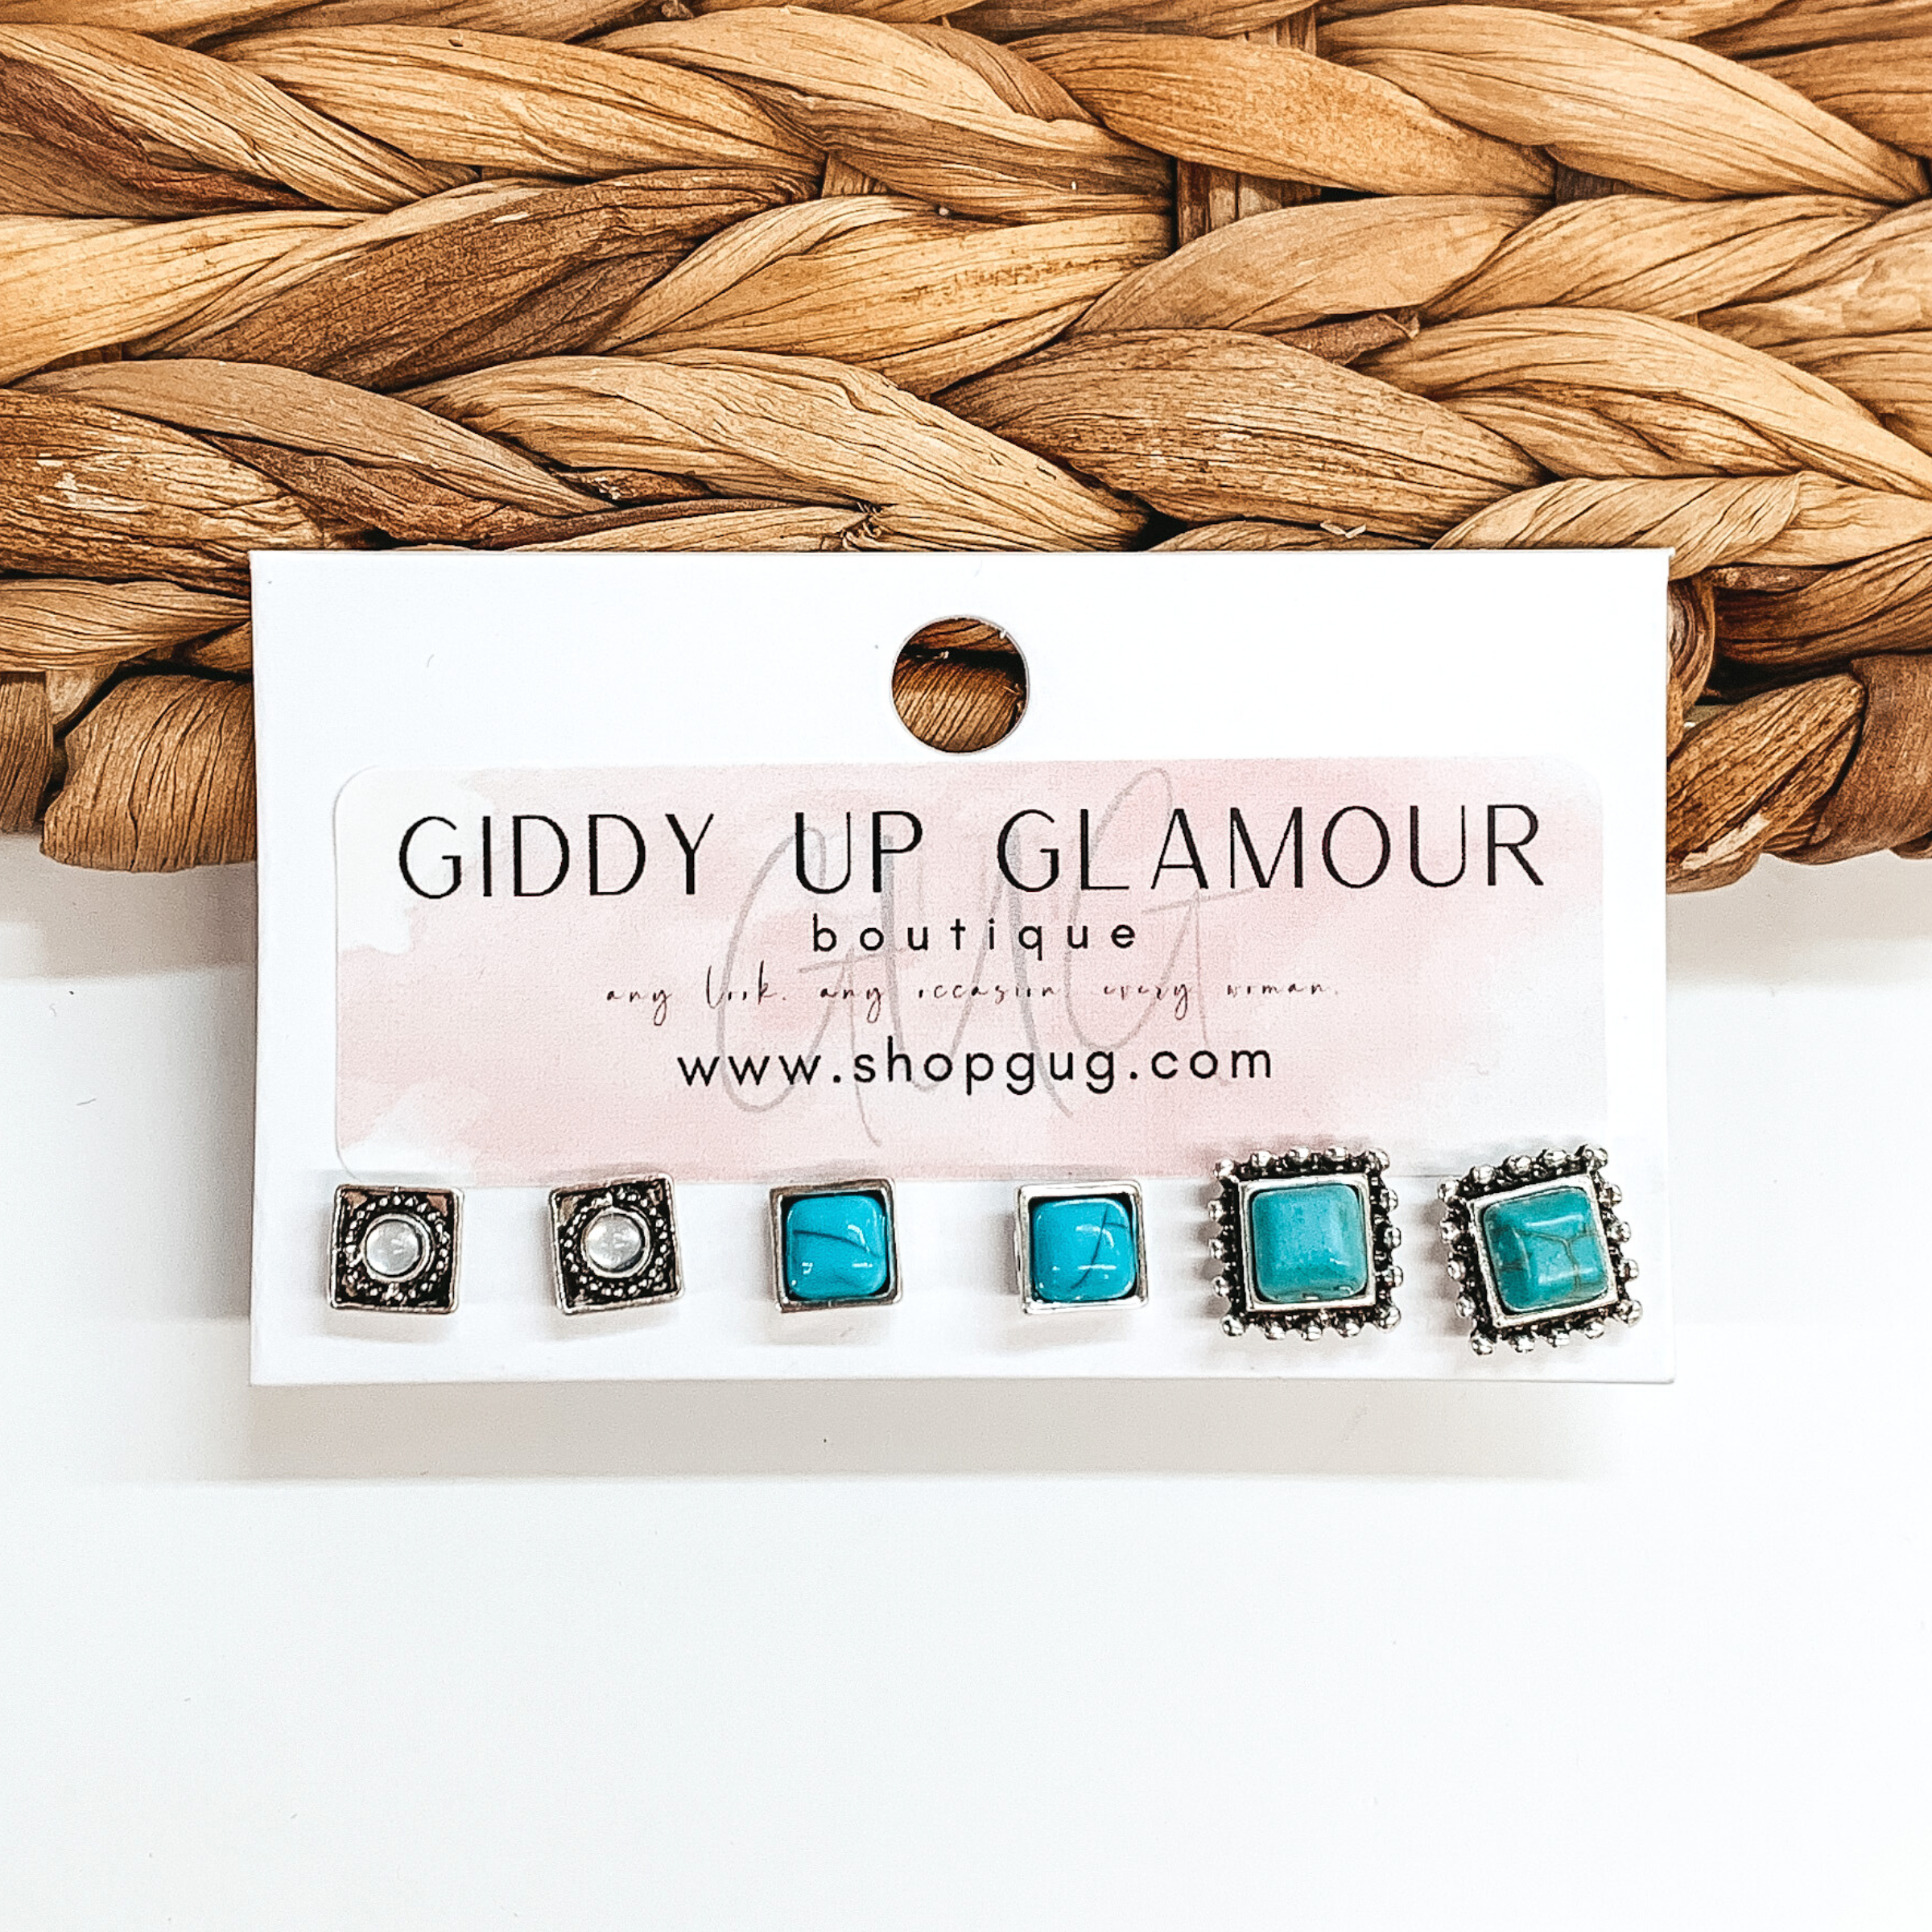 Set of three silver square stud earrings. Two pairs of studs include turquoise colored stones and the last set includes clear stones. These earrings are pictured on a white card holder on a white background with basket weave in the background.